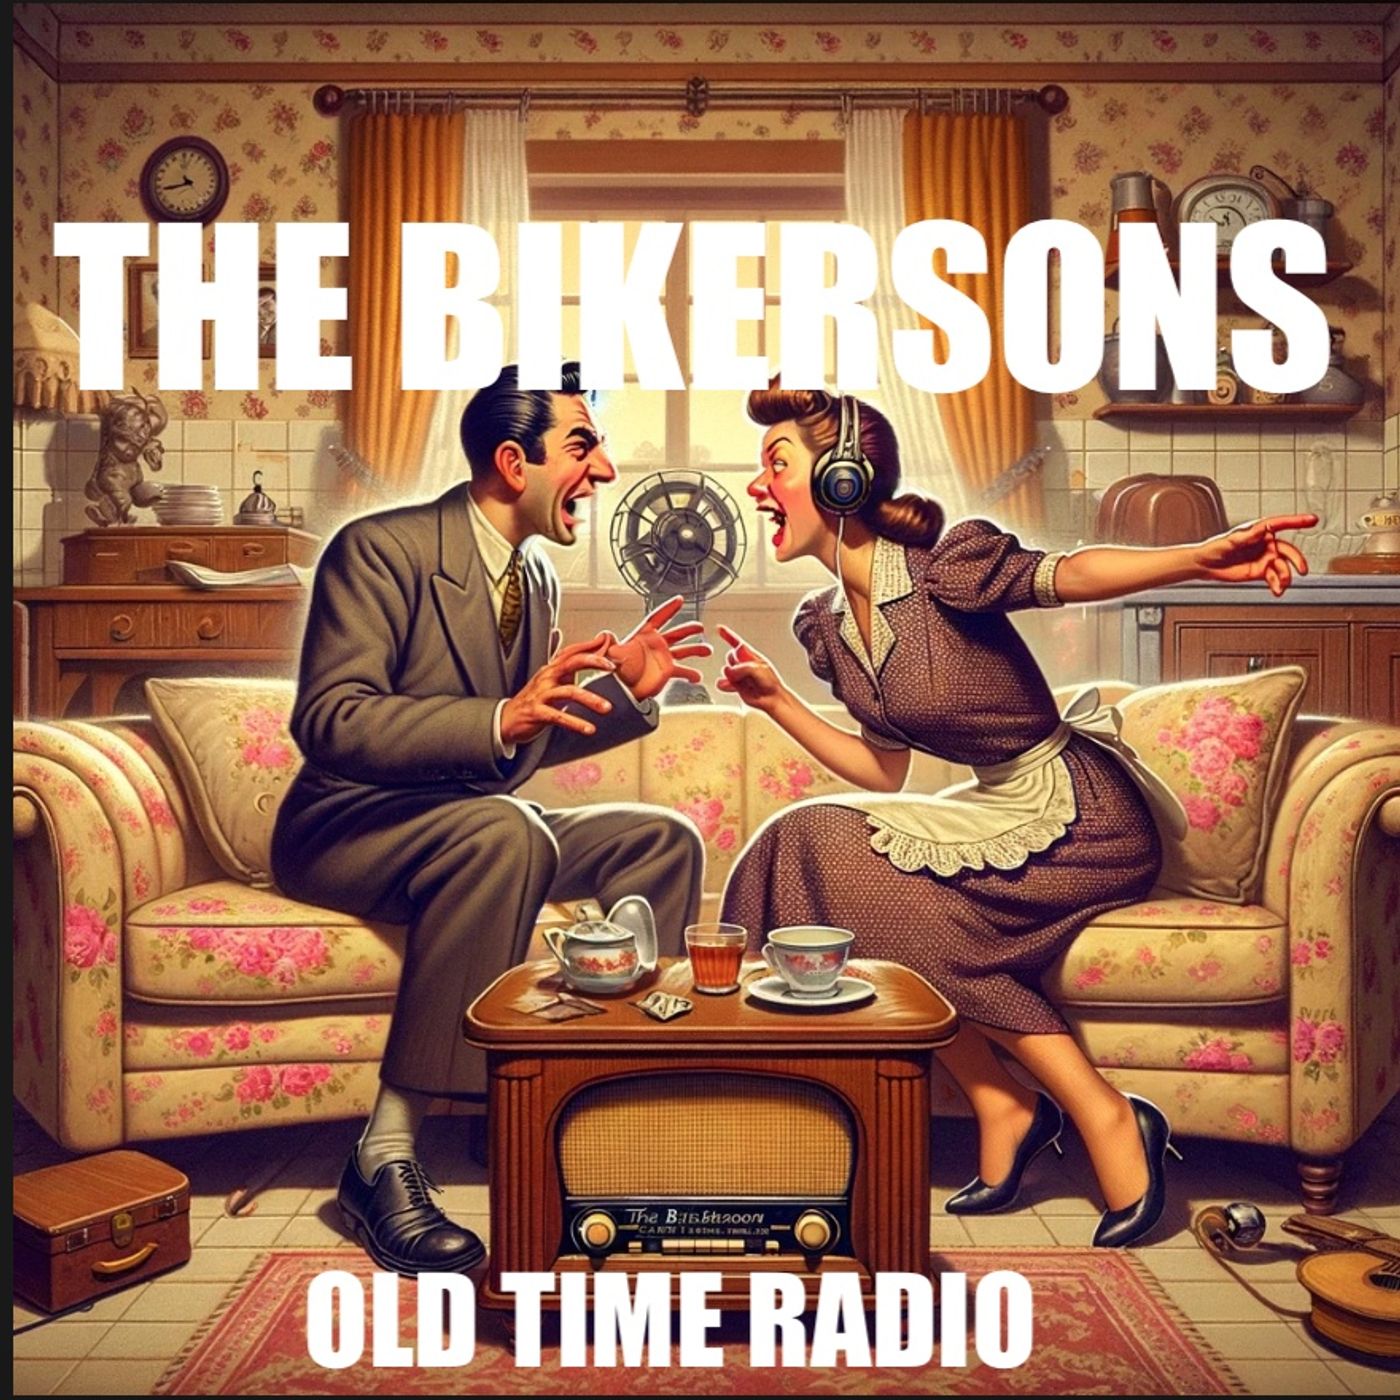 TheGoosebyVacation an episode of The Bickersons - Old Time Radio